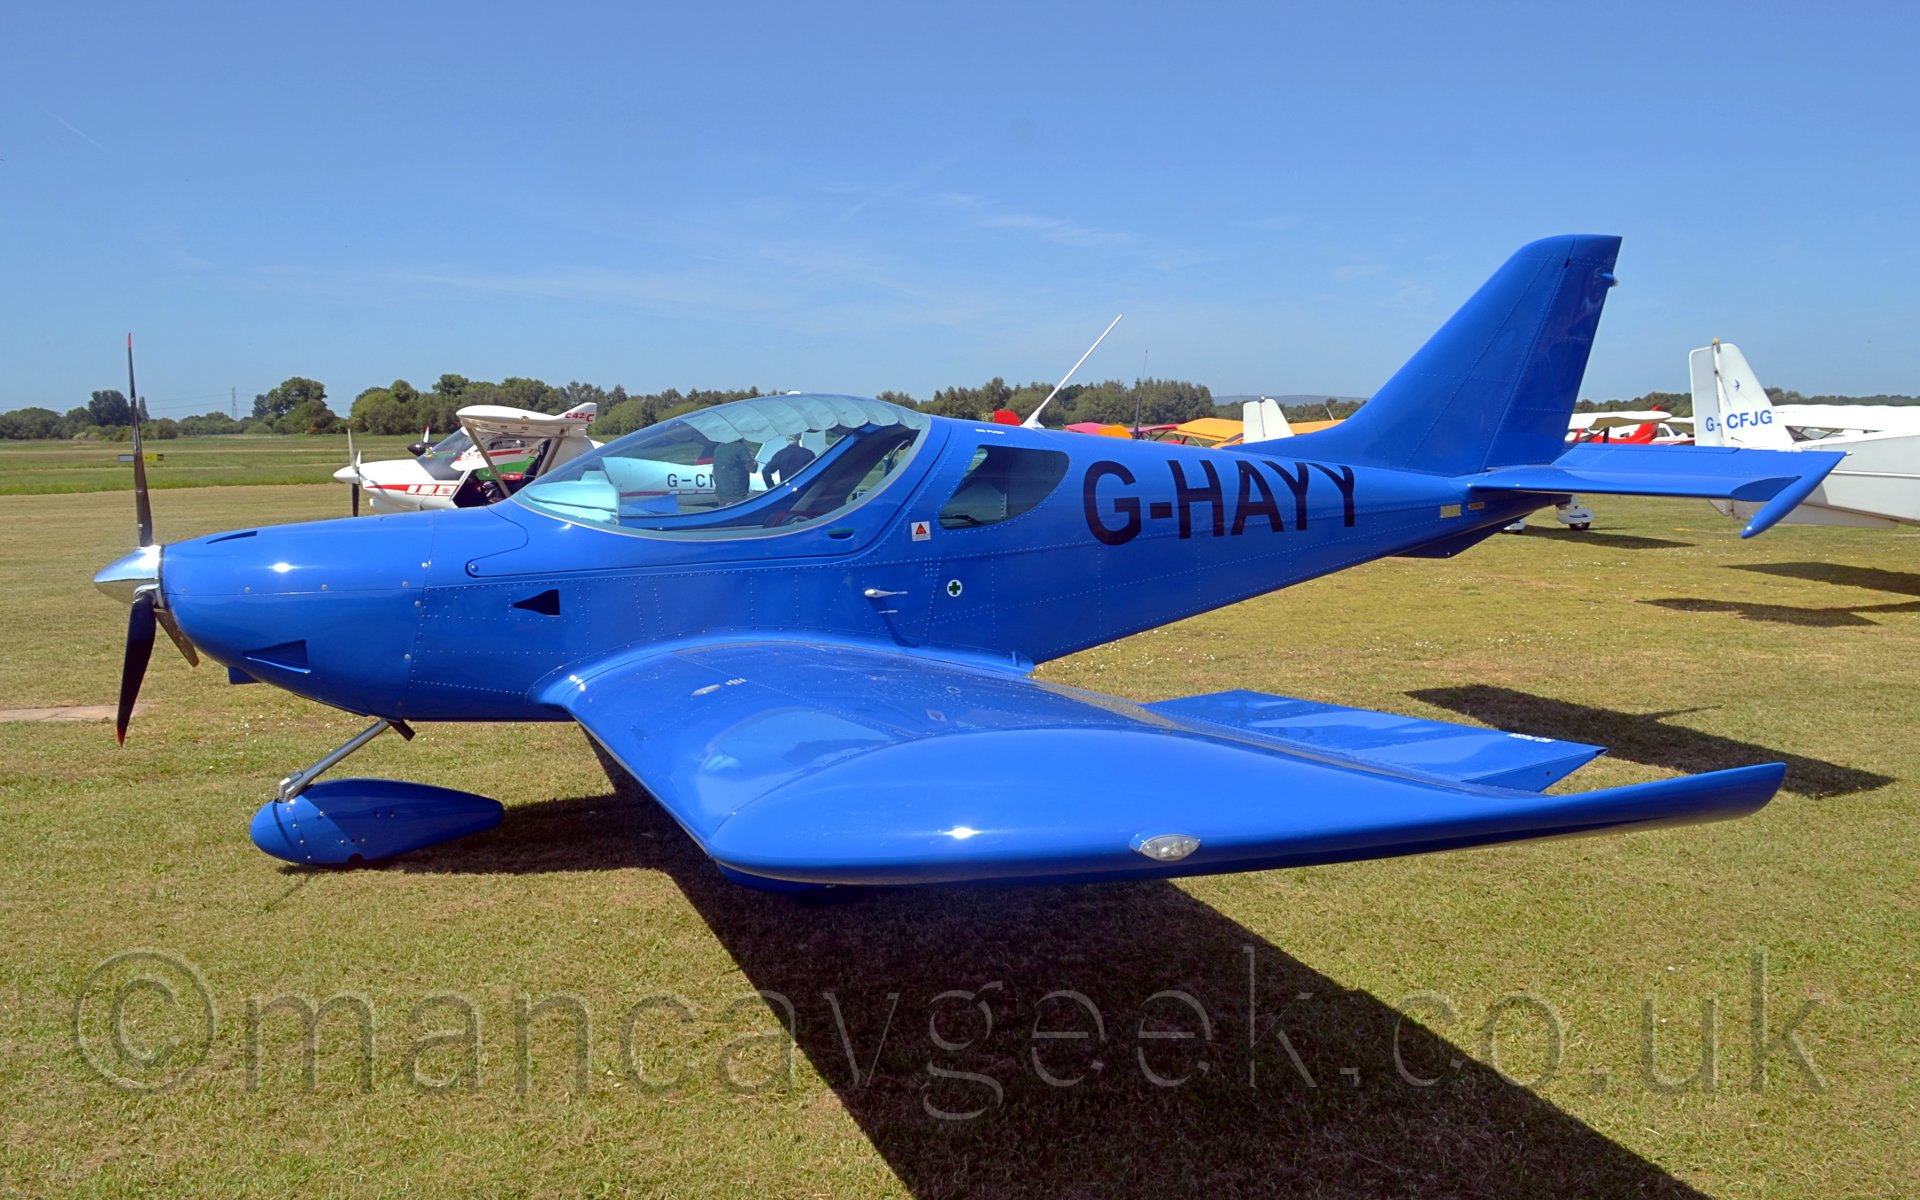 Side view of a single engined light aircraft facing to the left. The plane is entirely blue, with the registration "G-HAYY" on the rear fuselage. in the background are several other light aircraft, with trees in the far distance, under a gorgeous blue sky.